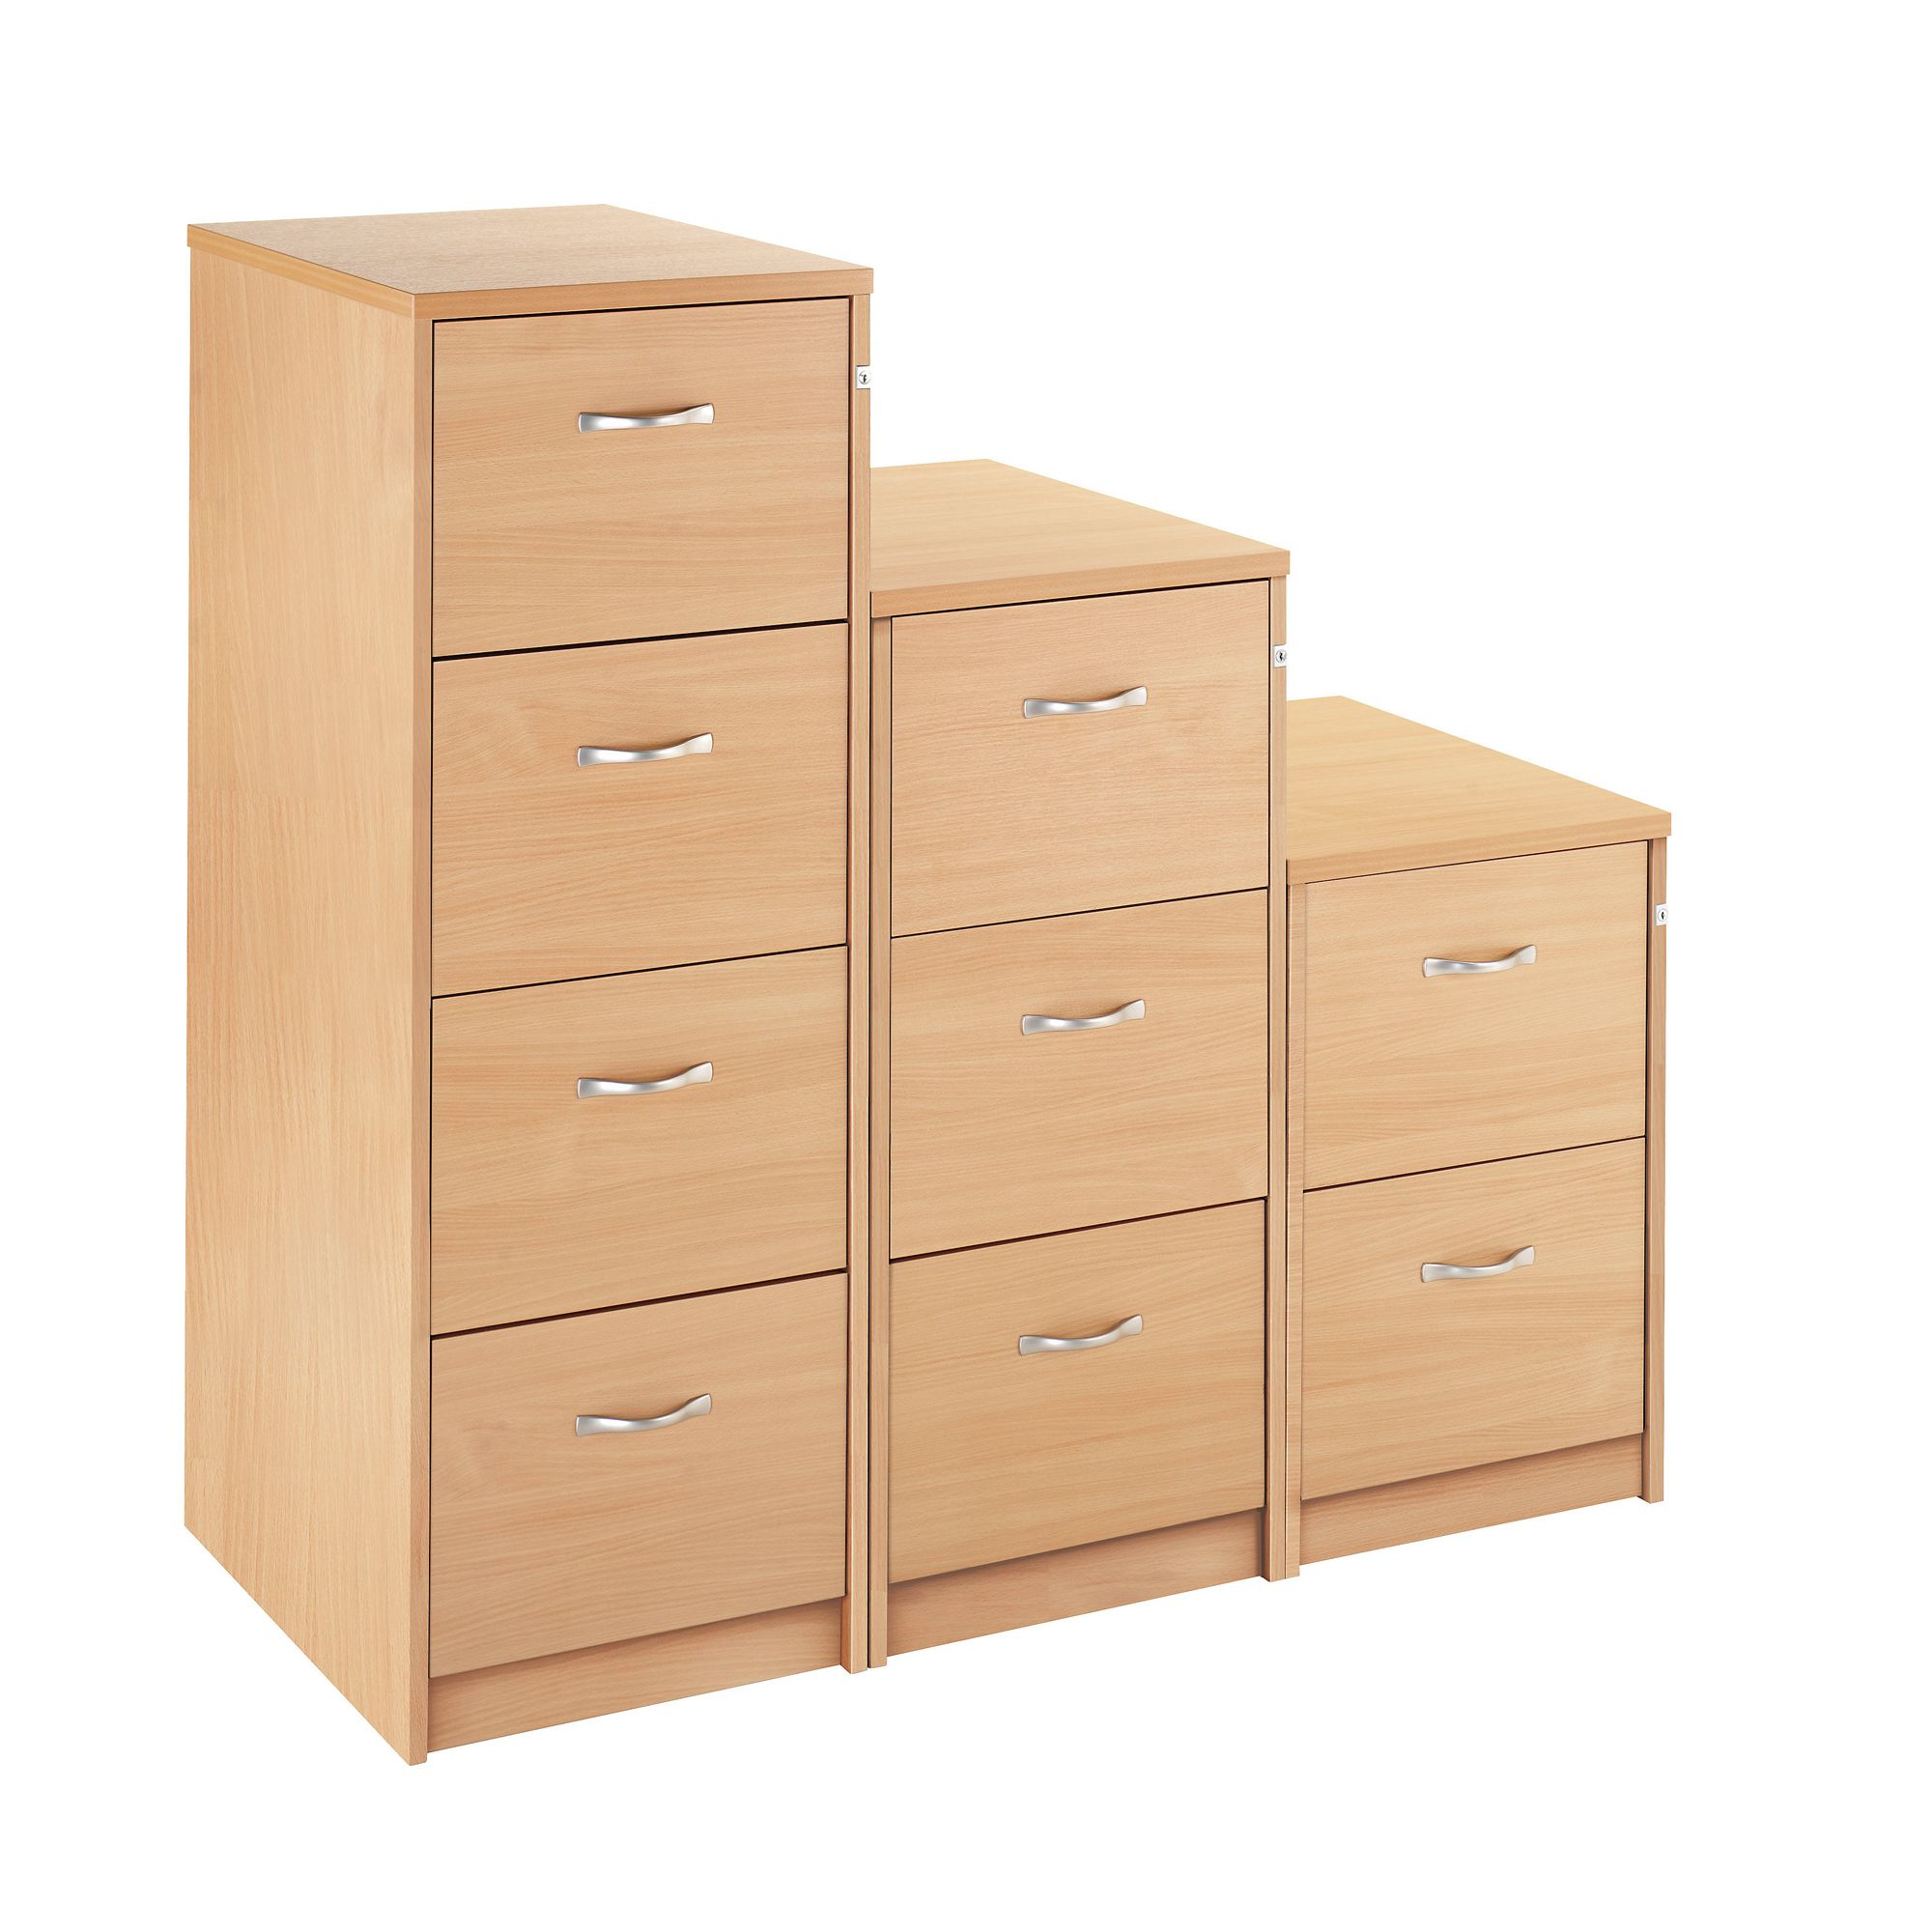 Classmates Wooden Filing Cabinet 4 Drawer Hope Education in size 2000 X 2000